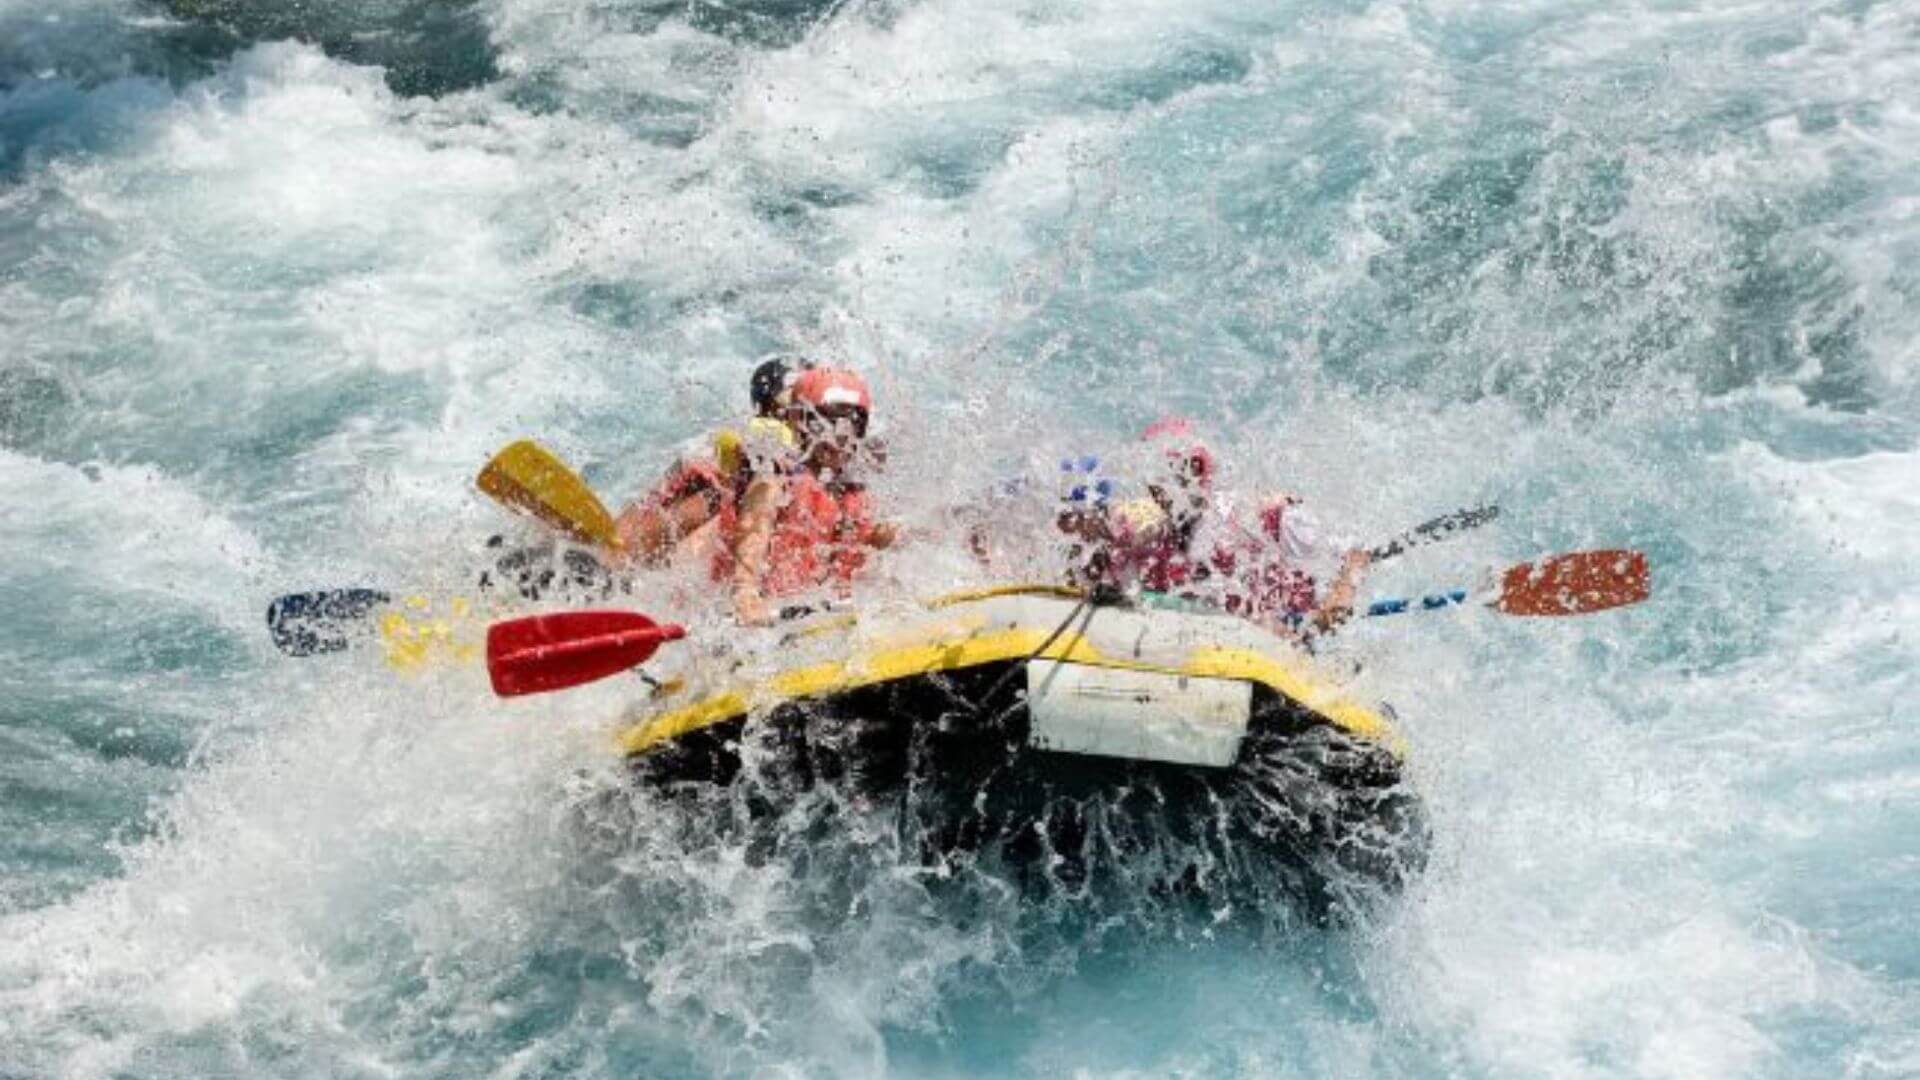 Group of people white-water rafting down rapids